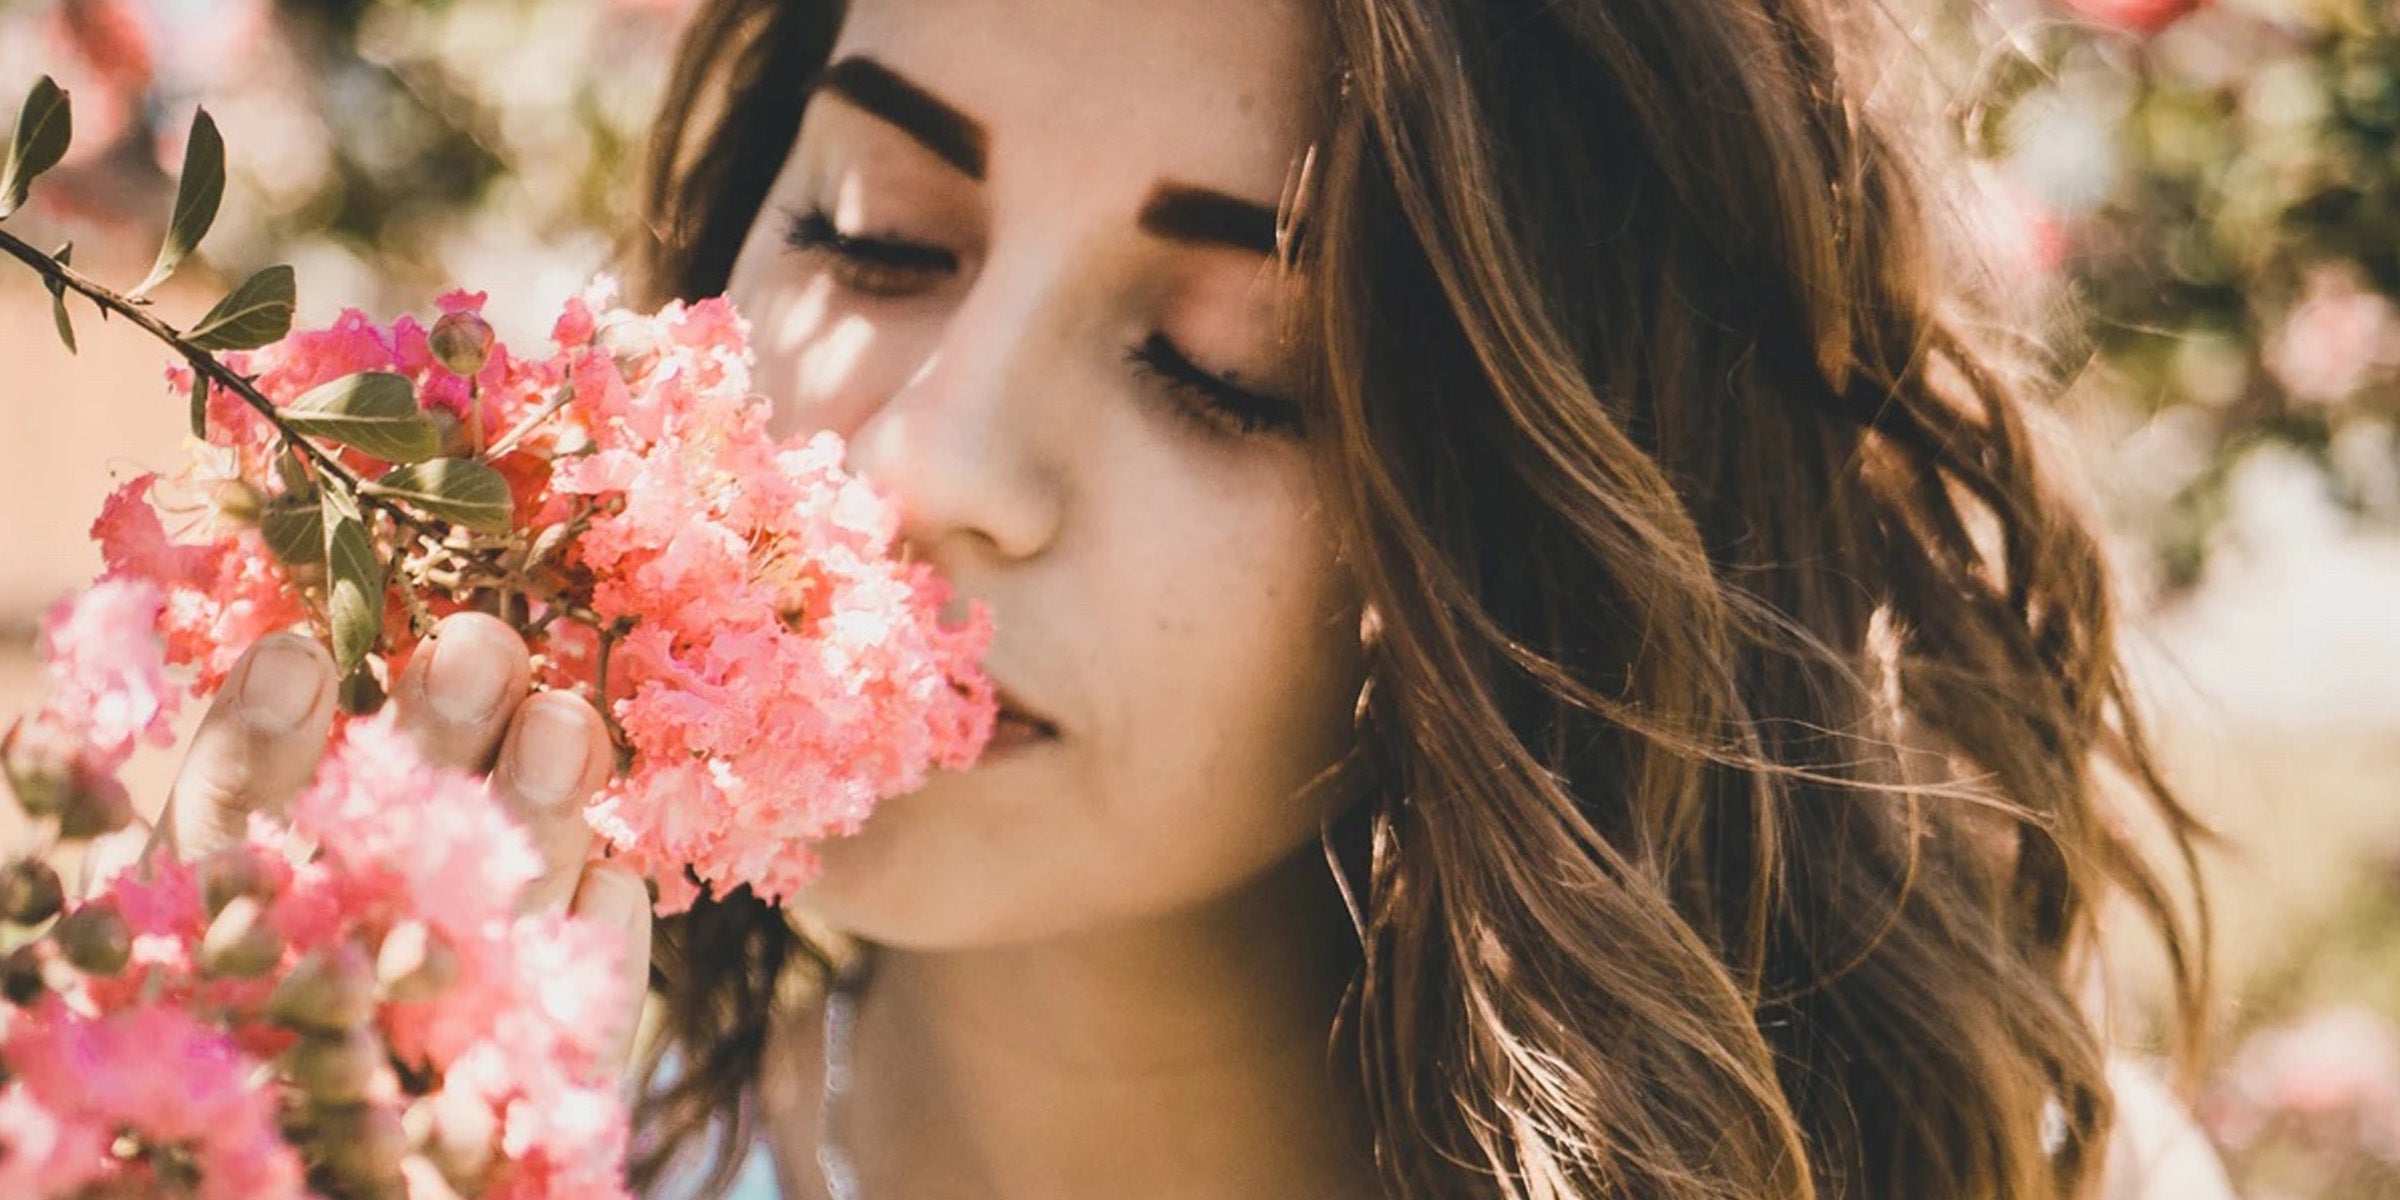 Woman smelling flowers outside